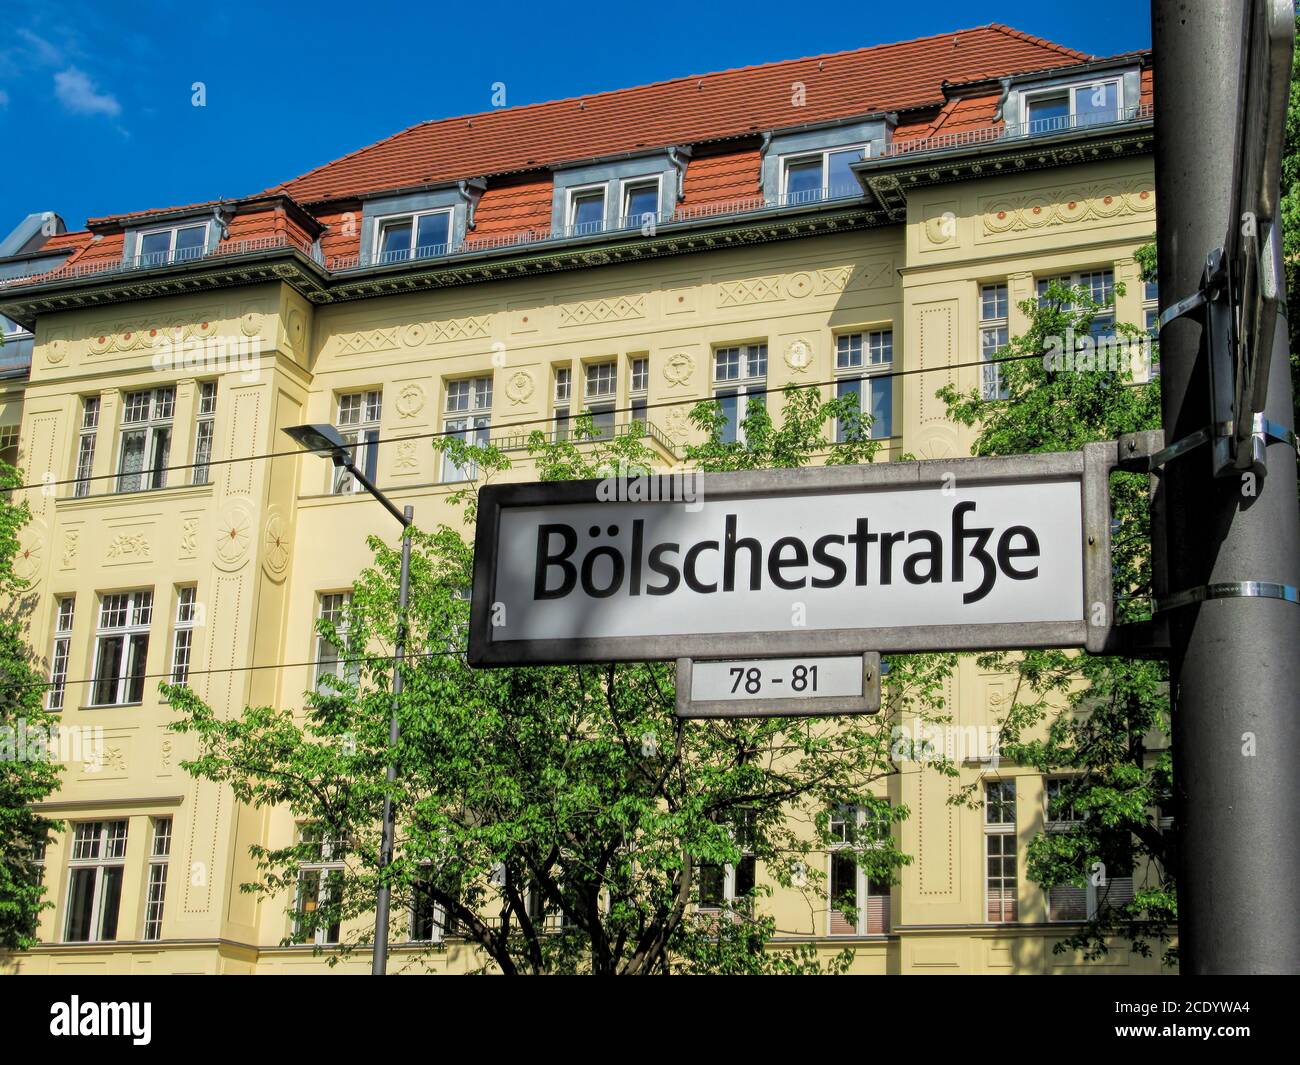 Berlin, Germany - May 21st, 2019 - reorganized old building on the historic bölsche street Stock Photo